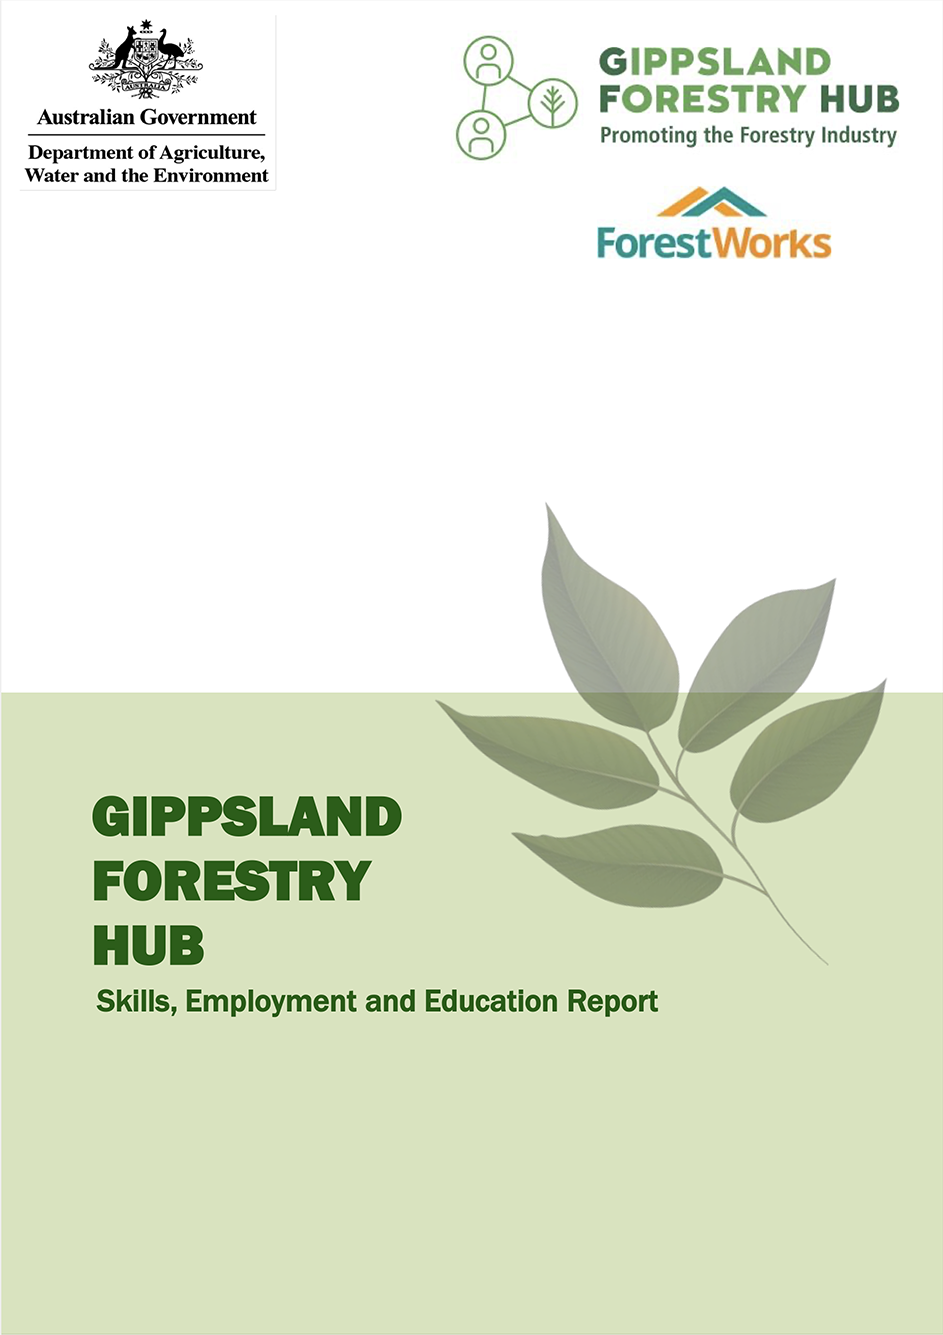 Image of the cover of the GF Hub Skills, Employment and Education report